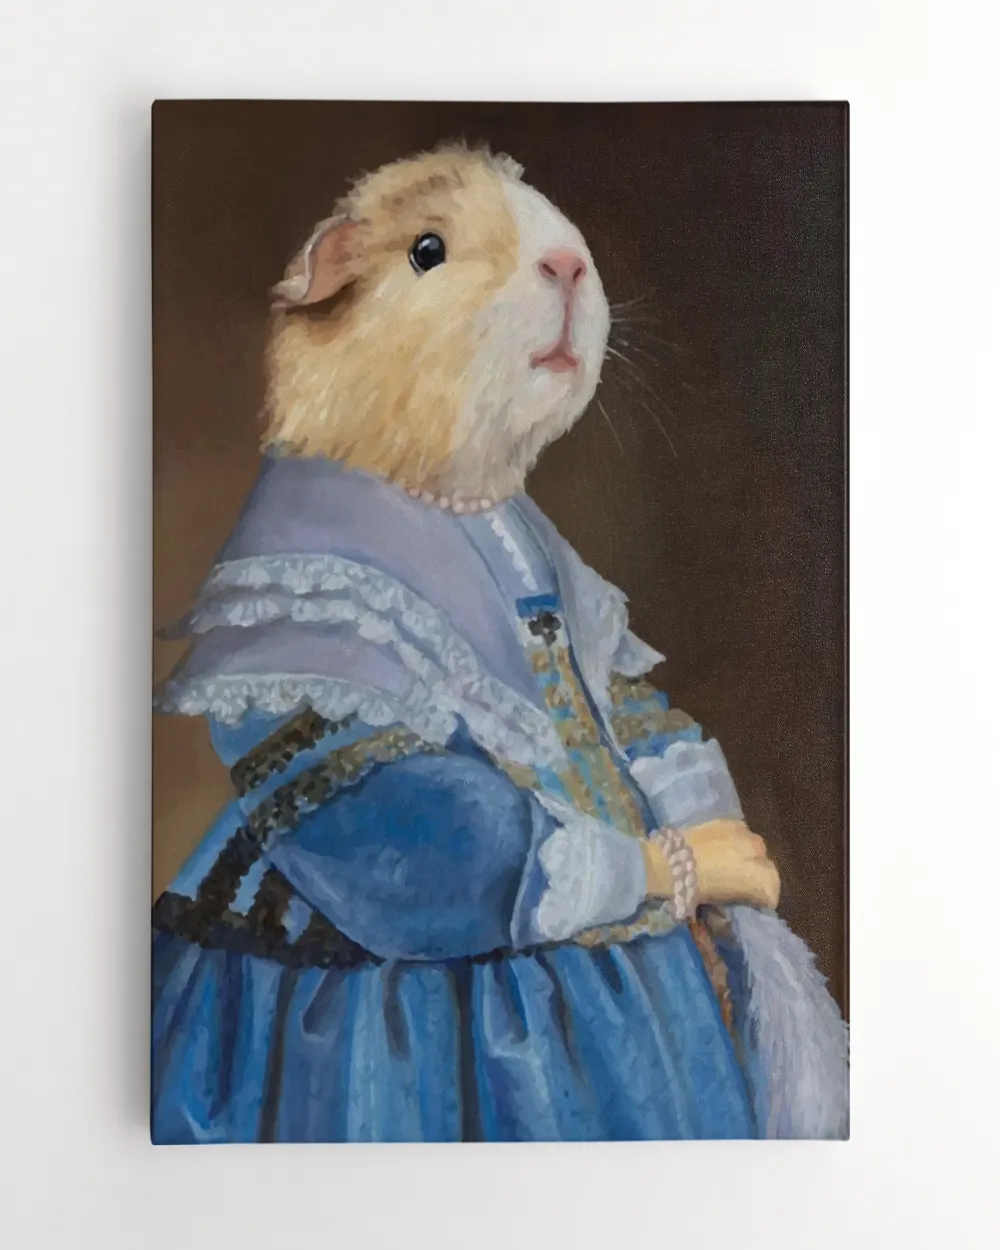 Guinea Pig Portrait on Stretch Fabric Wall Art Decor, ready to hang!